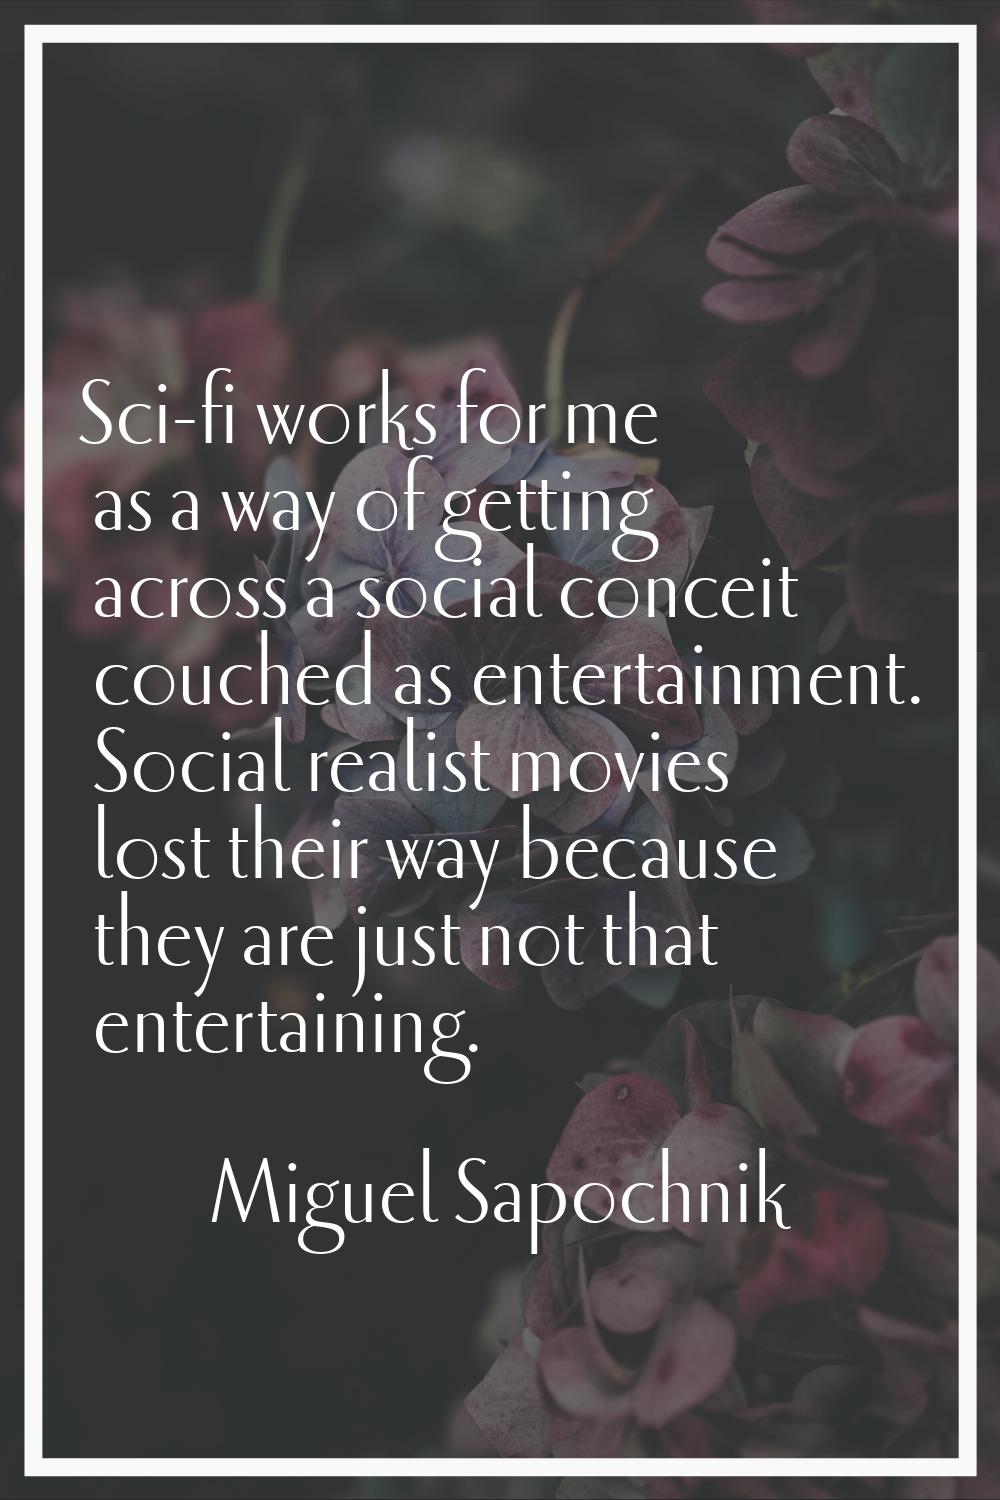 Sci-fi works for me as a way of getting across a social conceit couched as entertainment. Social re